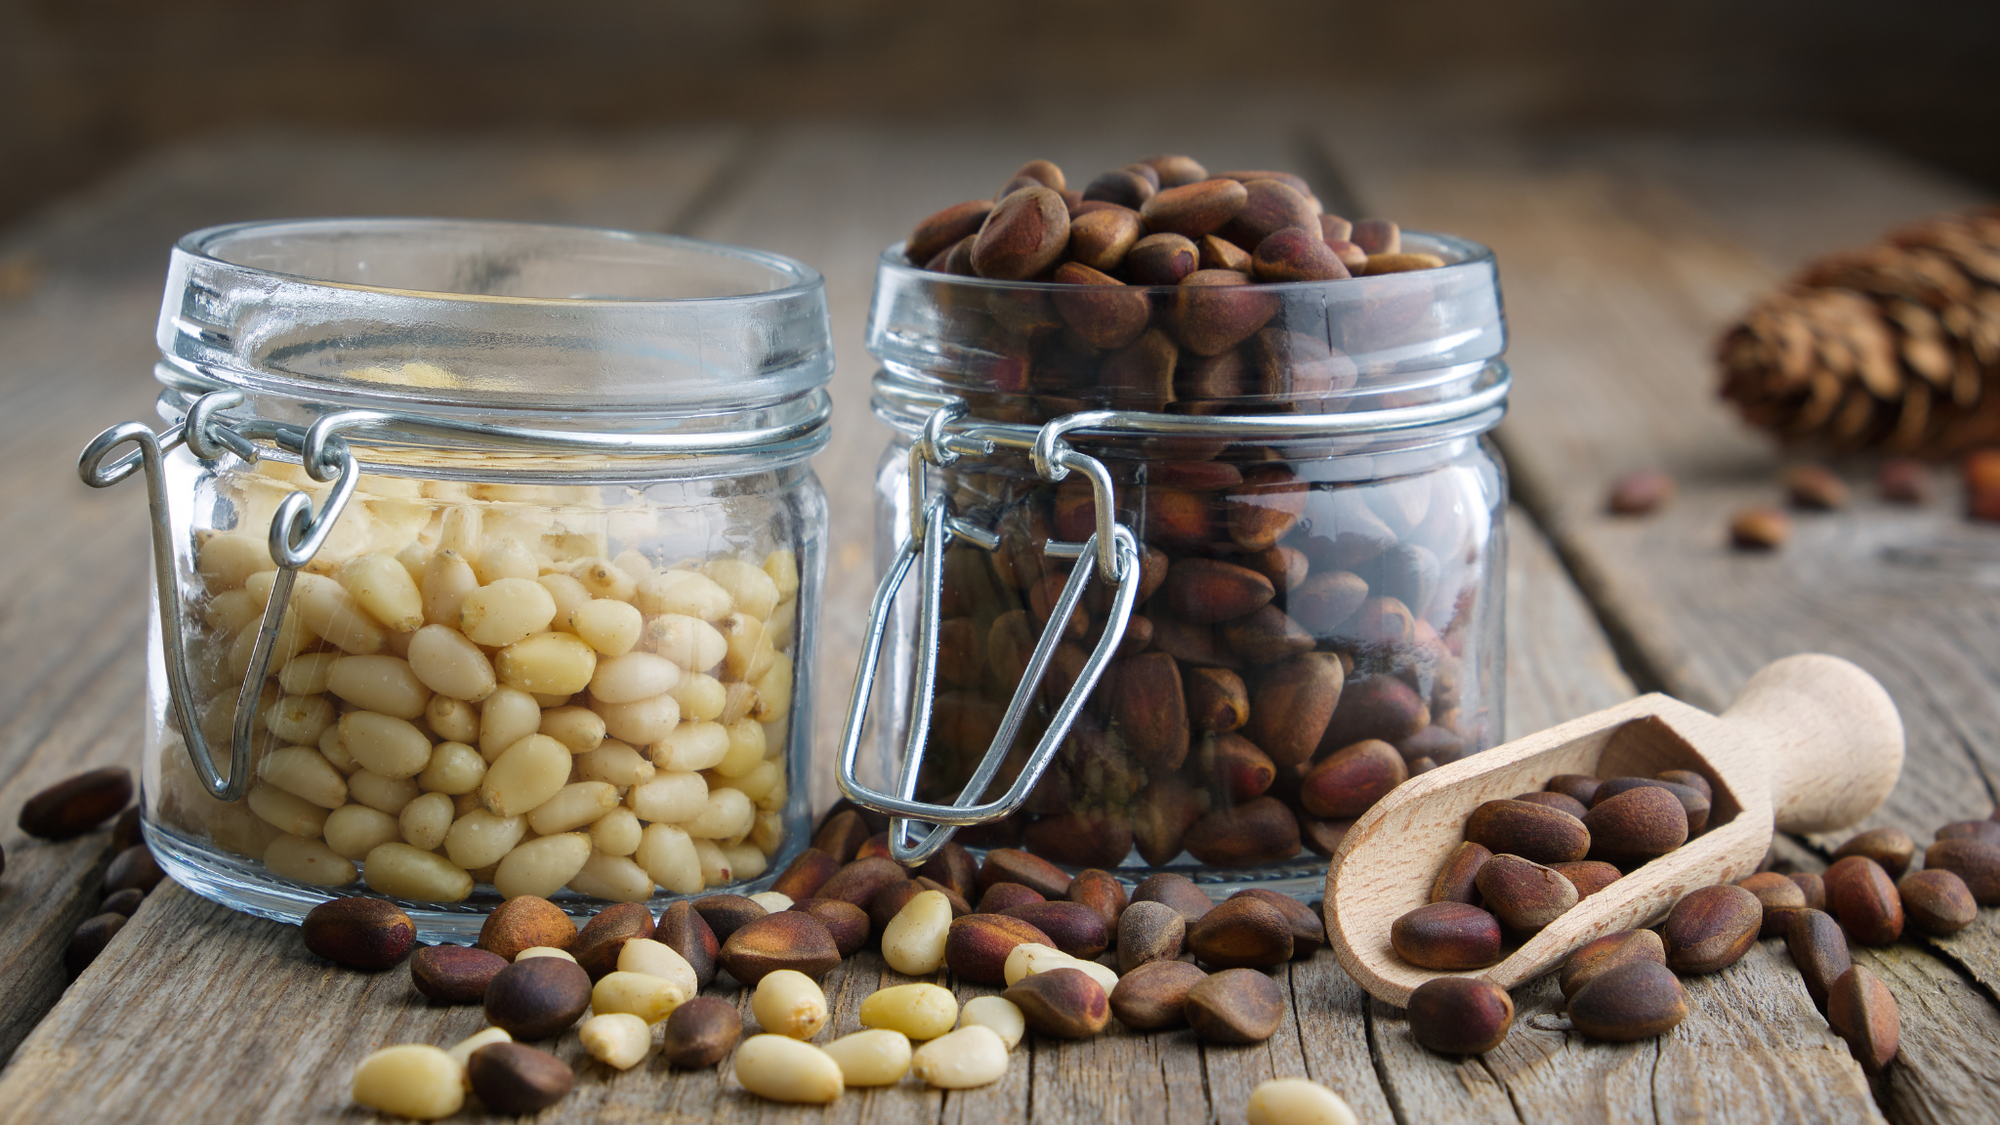 Can You Eat Nuts in a Bottle Every Day? Health Benefits and Risks